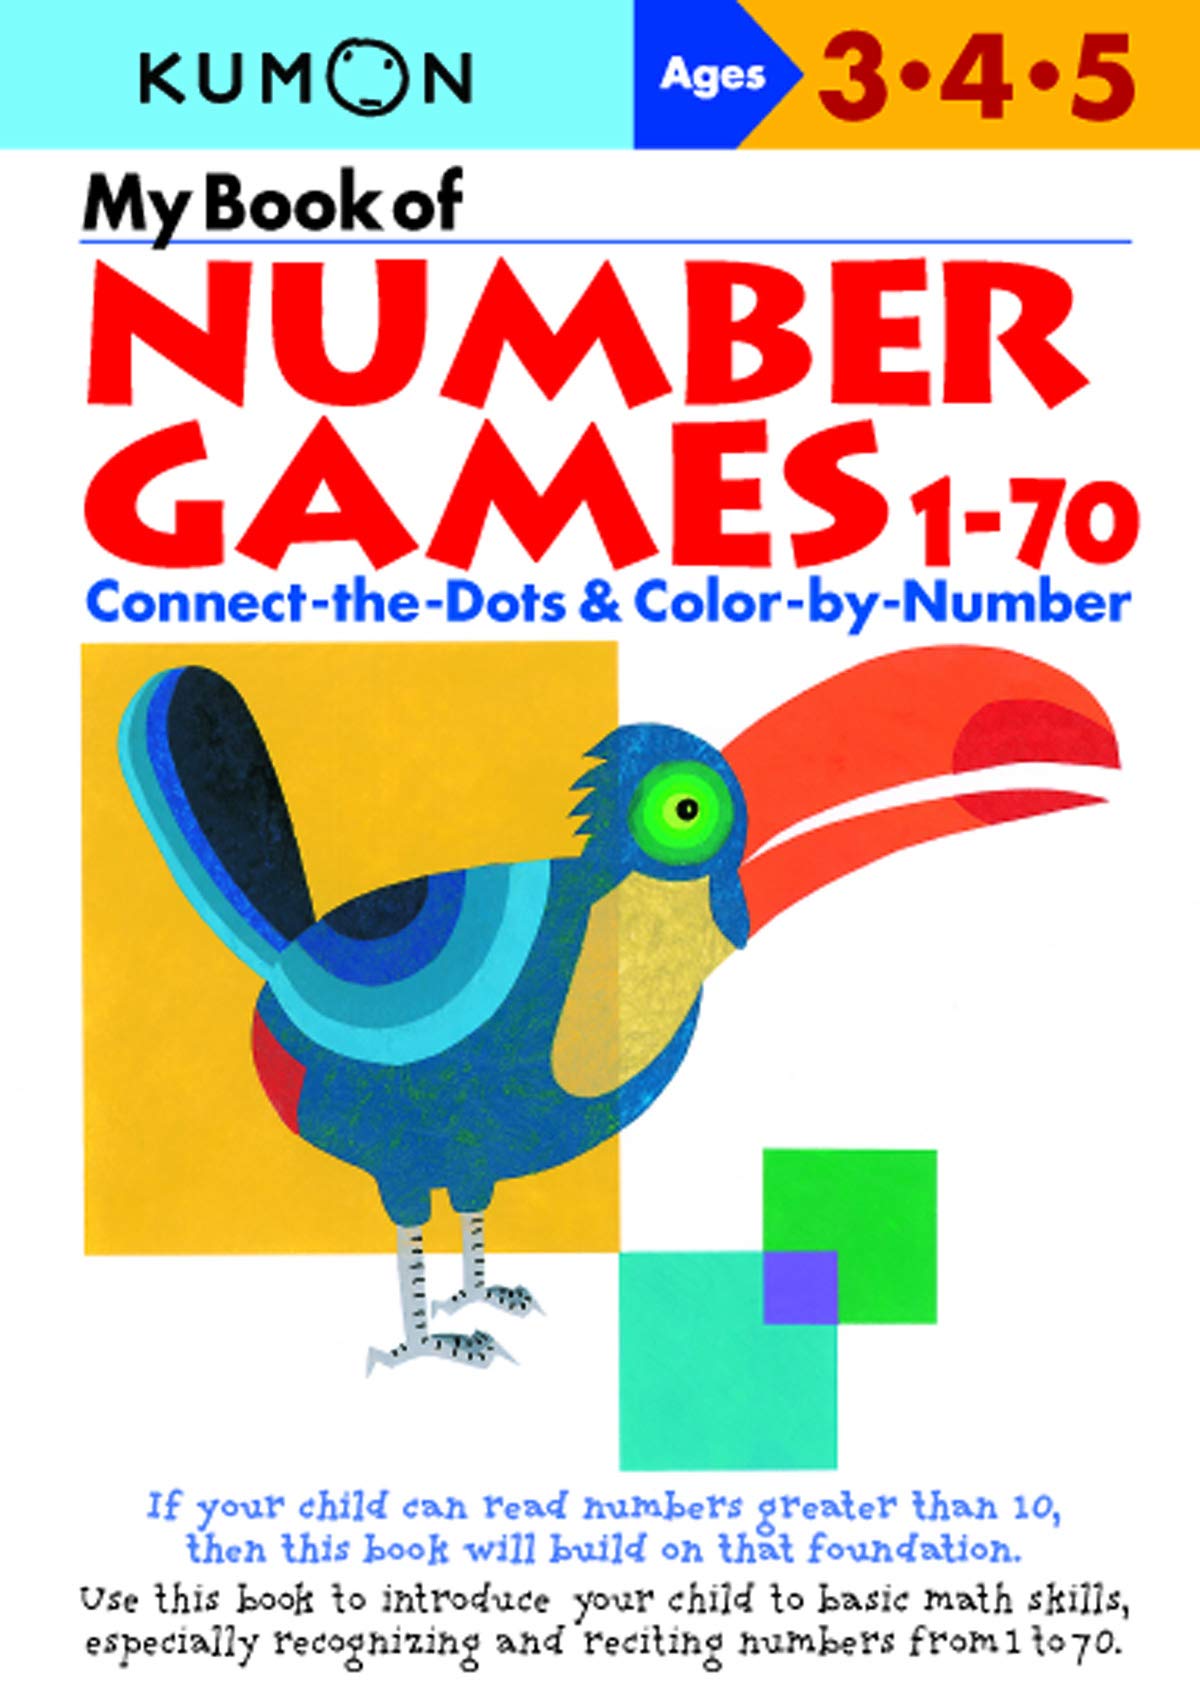 Kumon My Book Of Number Games 1-70